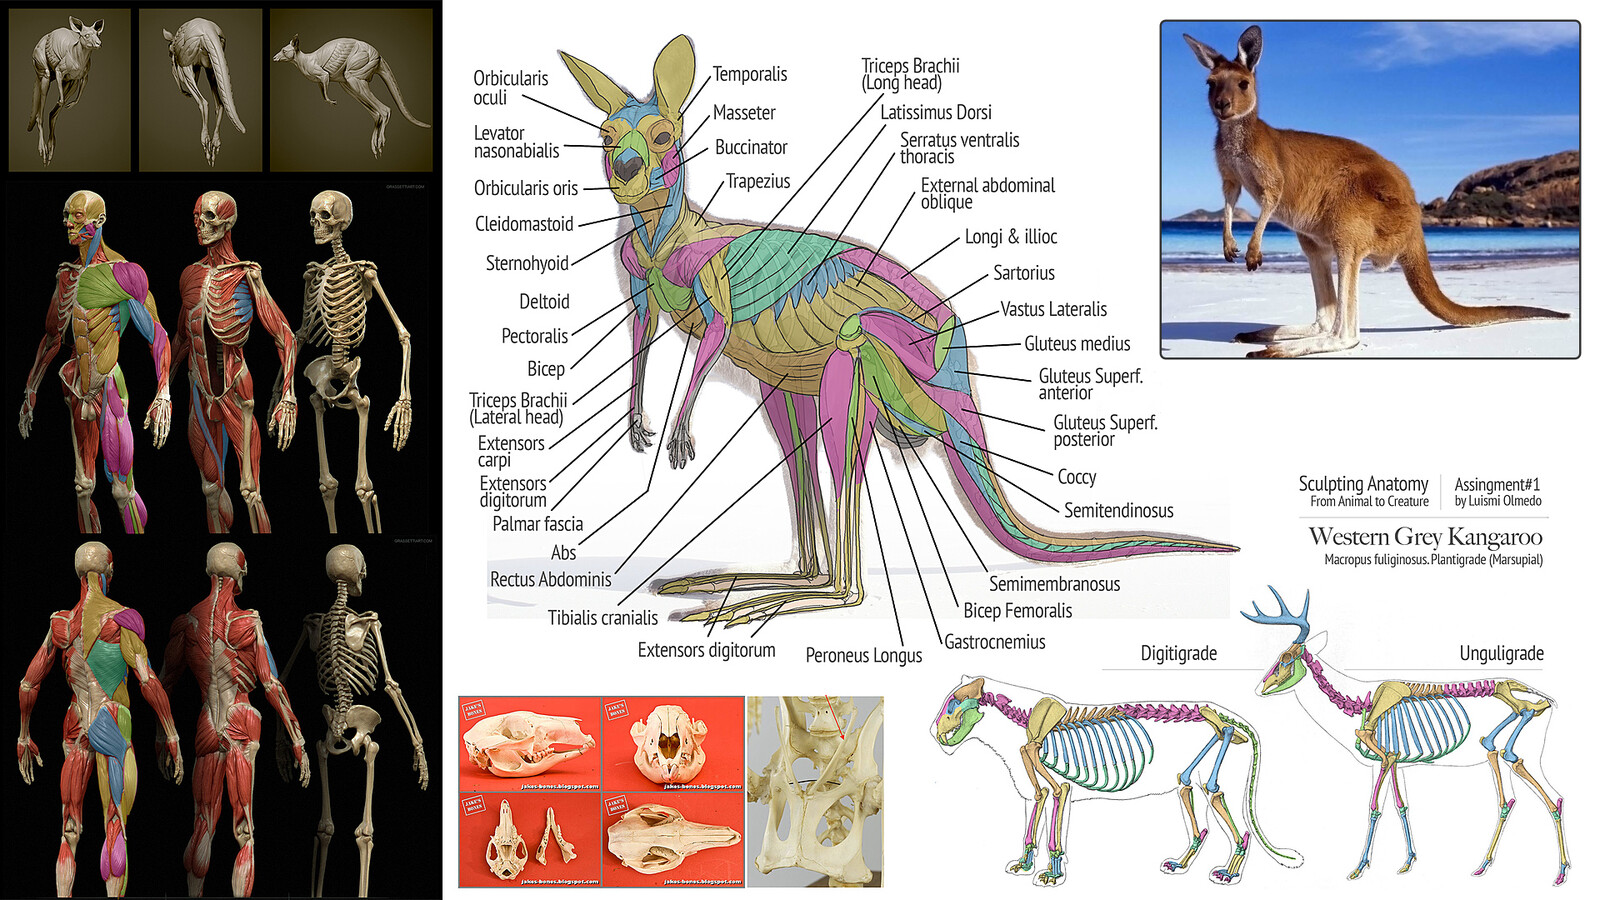 Kangaroo anatomical study and comparison of muscles